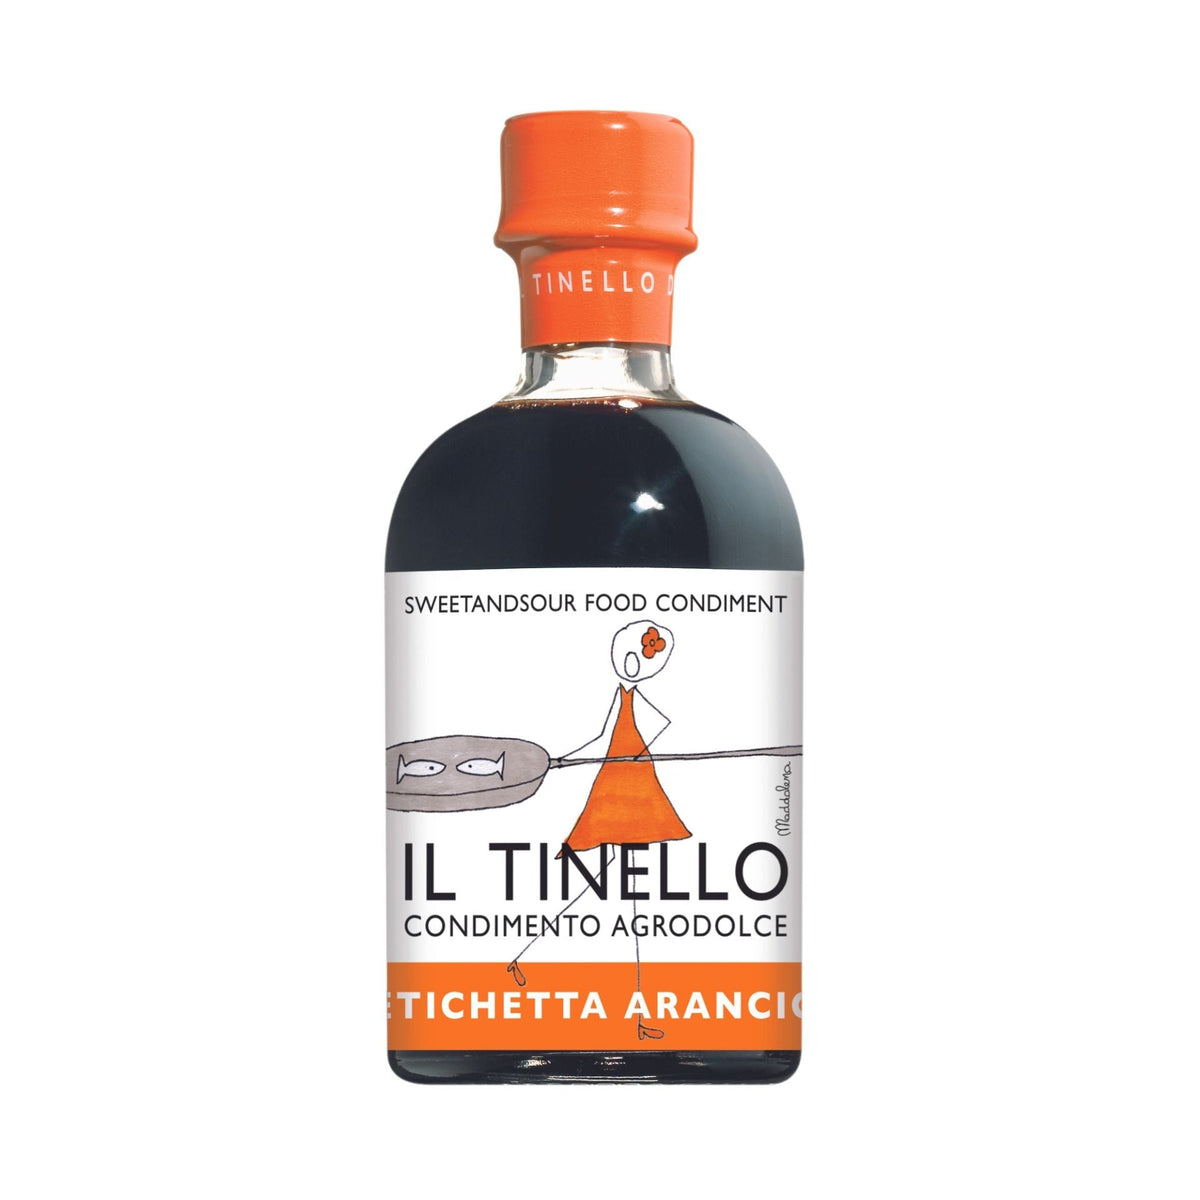 Il Borgo del Balsamico Il Tinello Balsamic Vinegar of Modena IGP Orange Label Medium Acidity (without box) 250ml  | Imported and distributed in the UK by Just Gourmet Foods